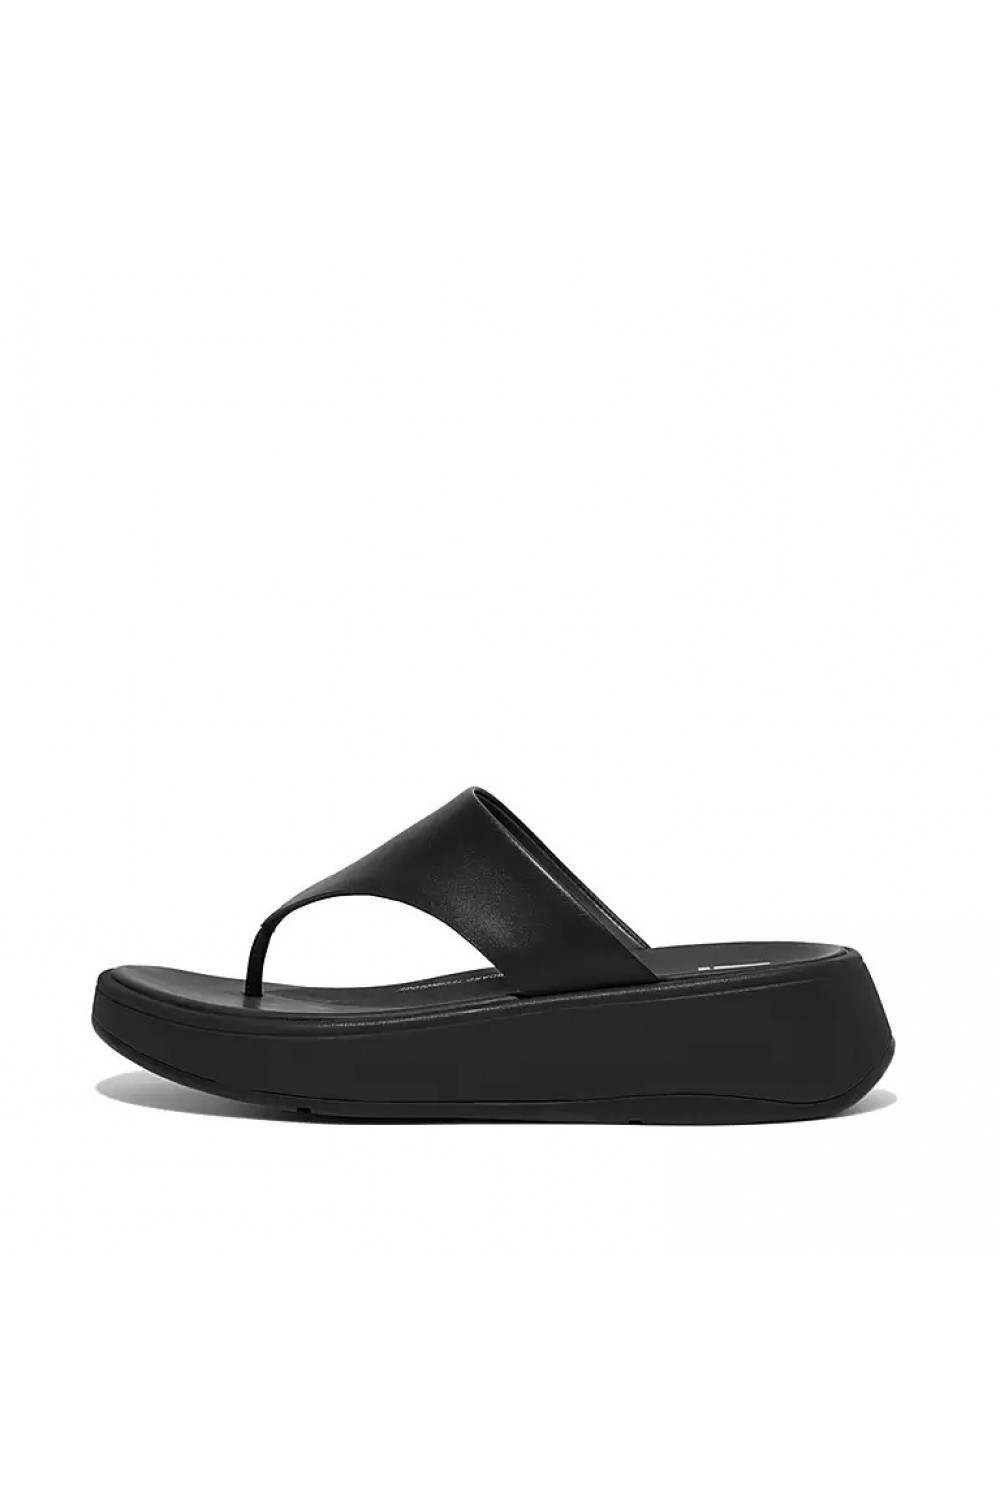 Fitflop F-MODE Luxe Leather Flatform Toe-Post Sandals All Black